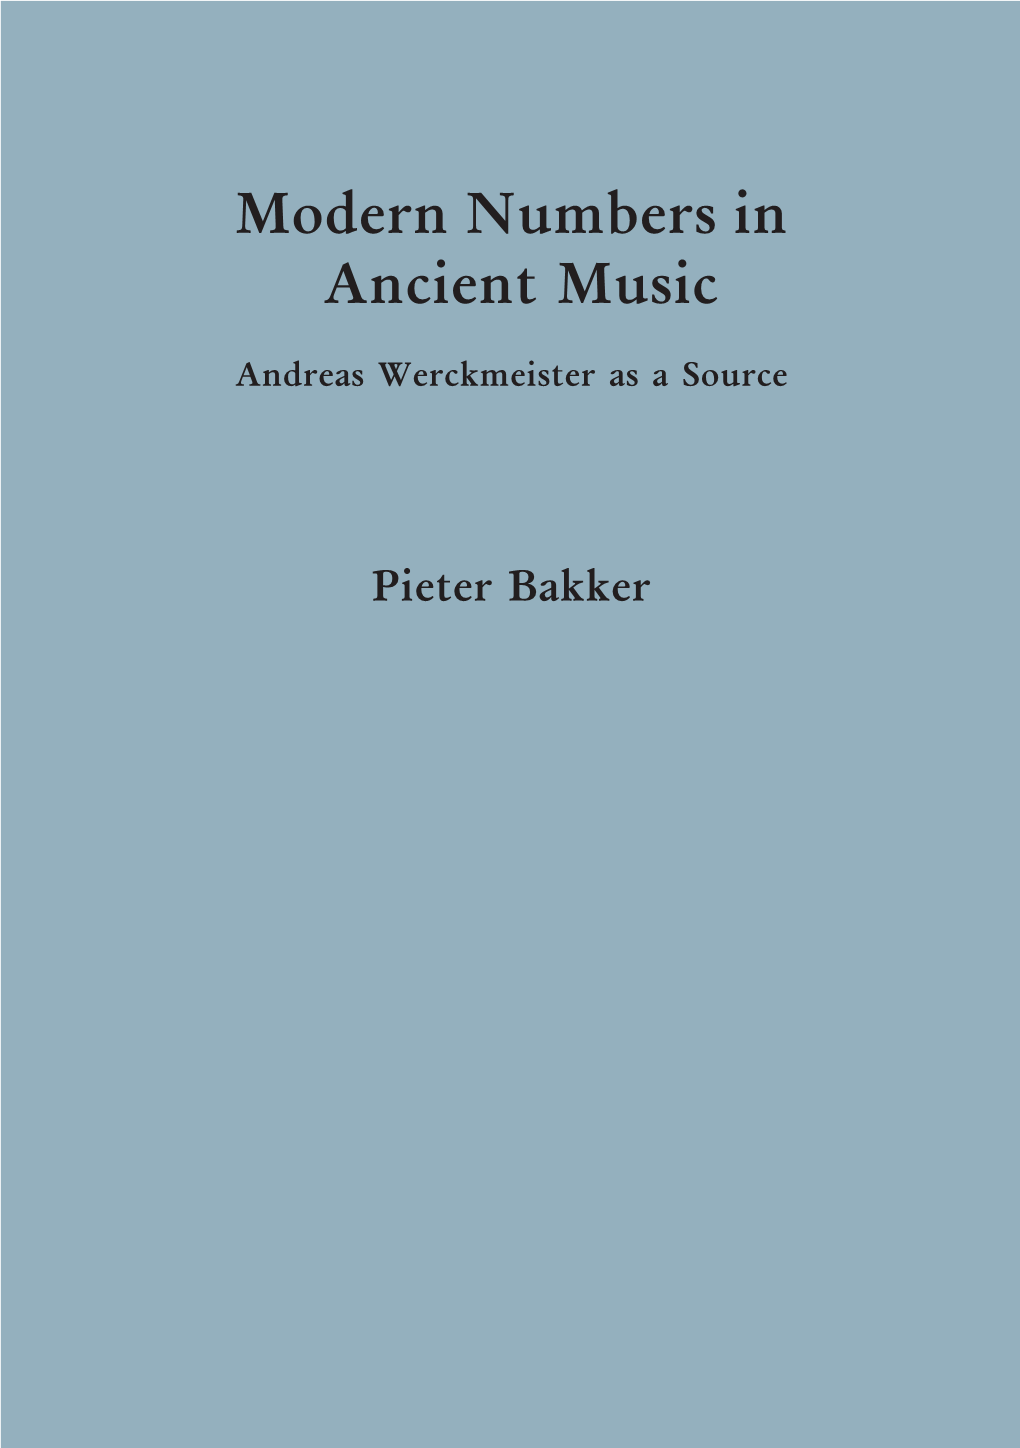 Modern Numbers in Ancient Music